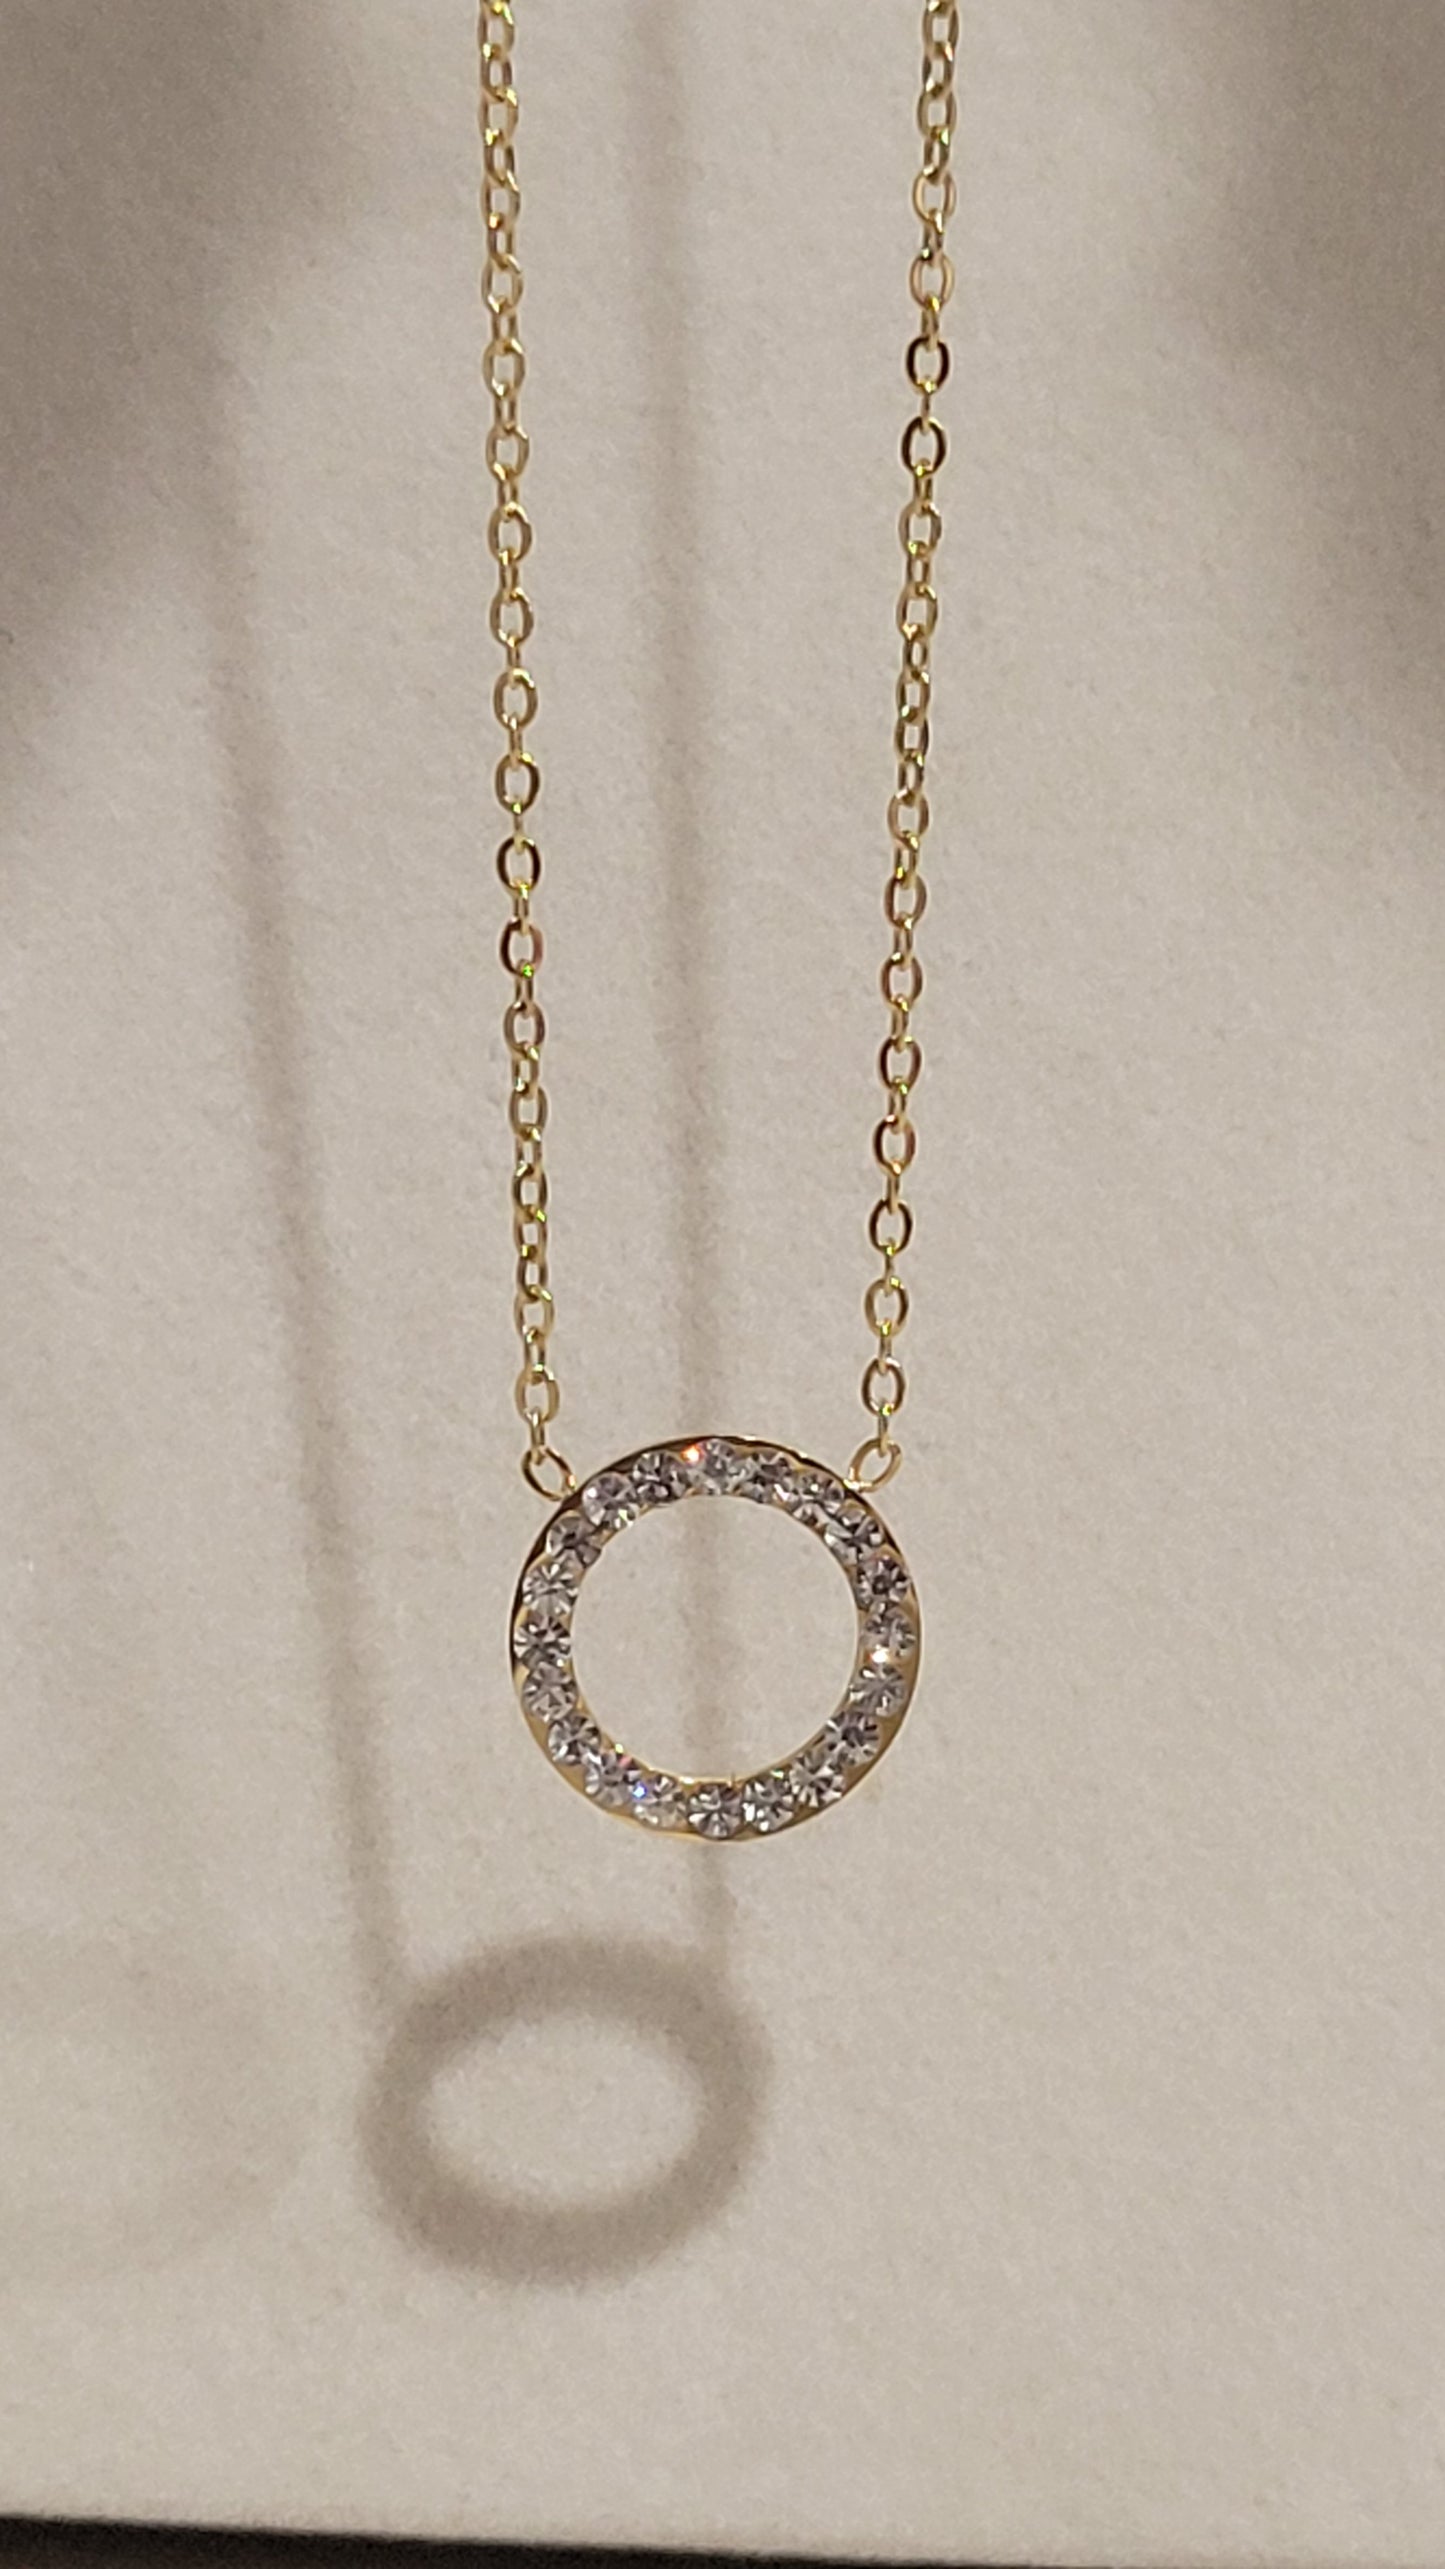 CIRLCE CHARM NECKLACE